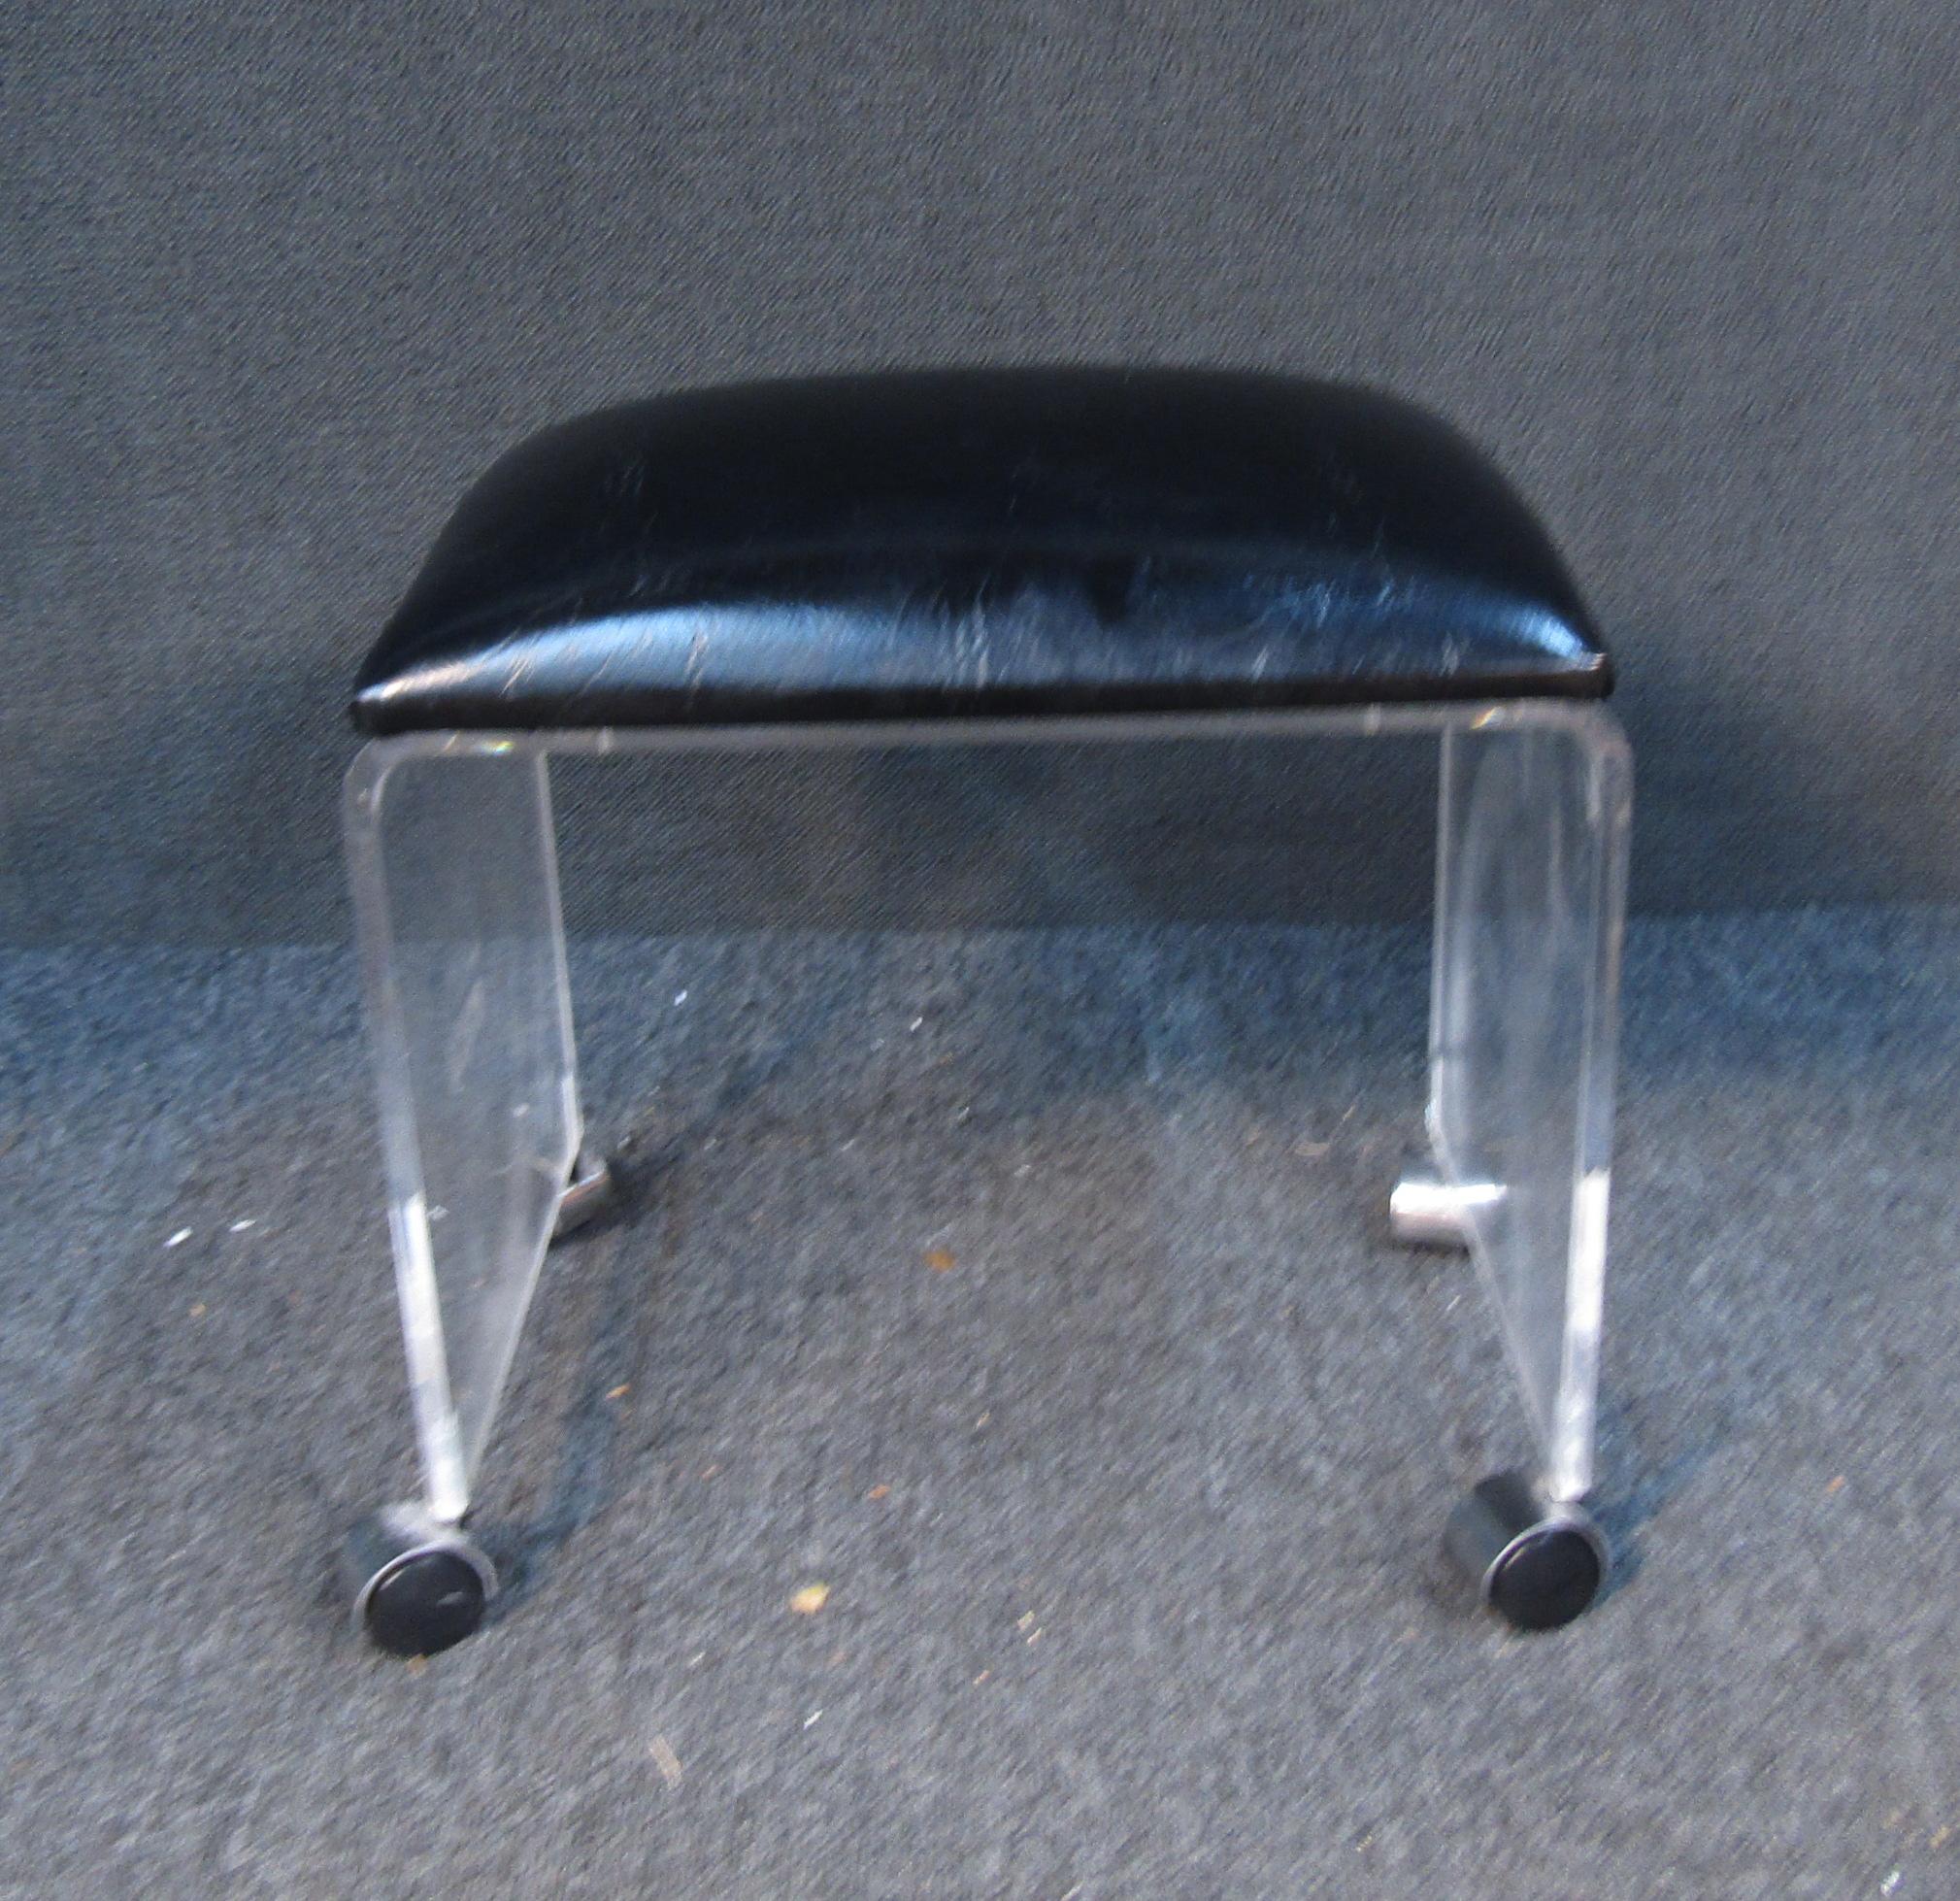 Unique little ottoman-stool on wheels. Black top with two wide fiberglass legs. 

(Please confirm item location - NY or NJ - with dealer).
 